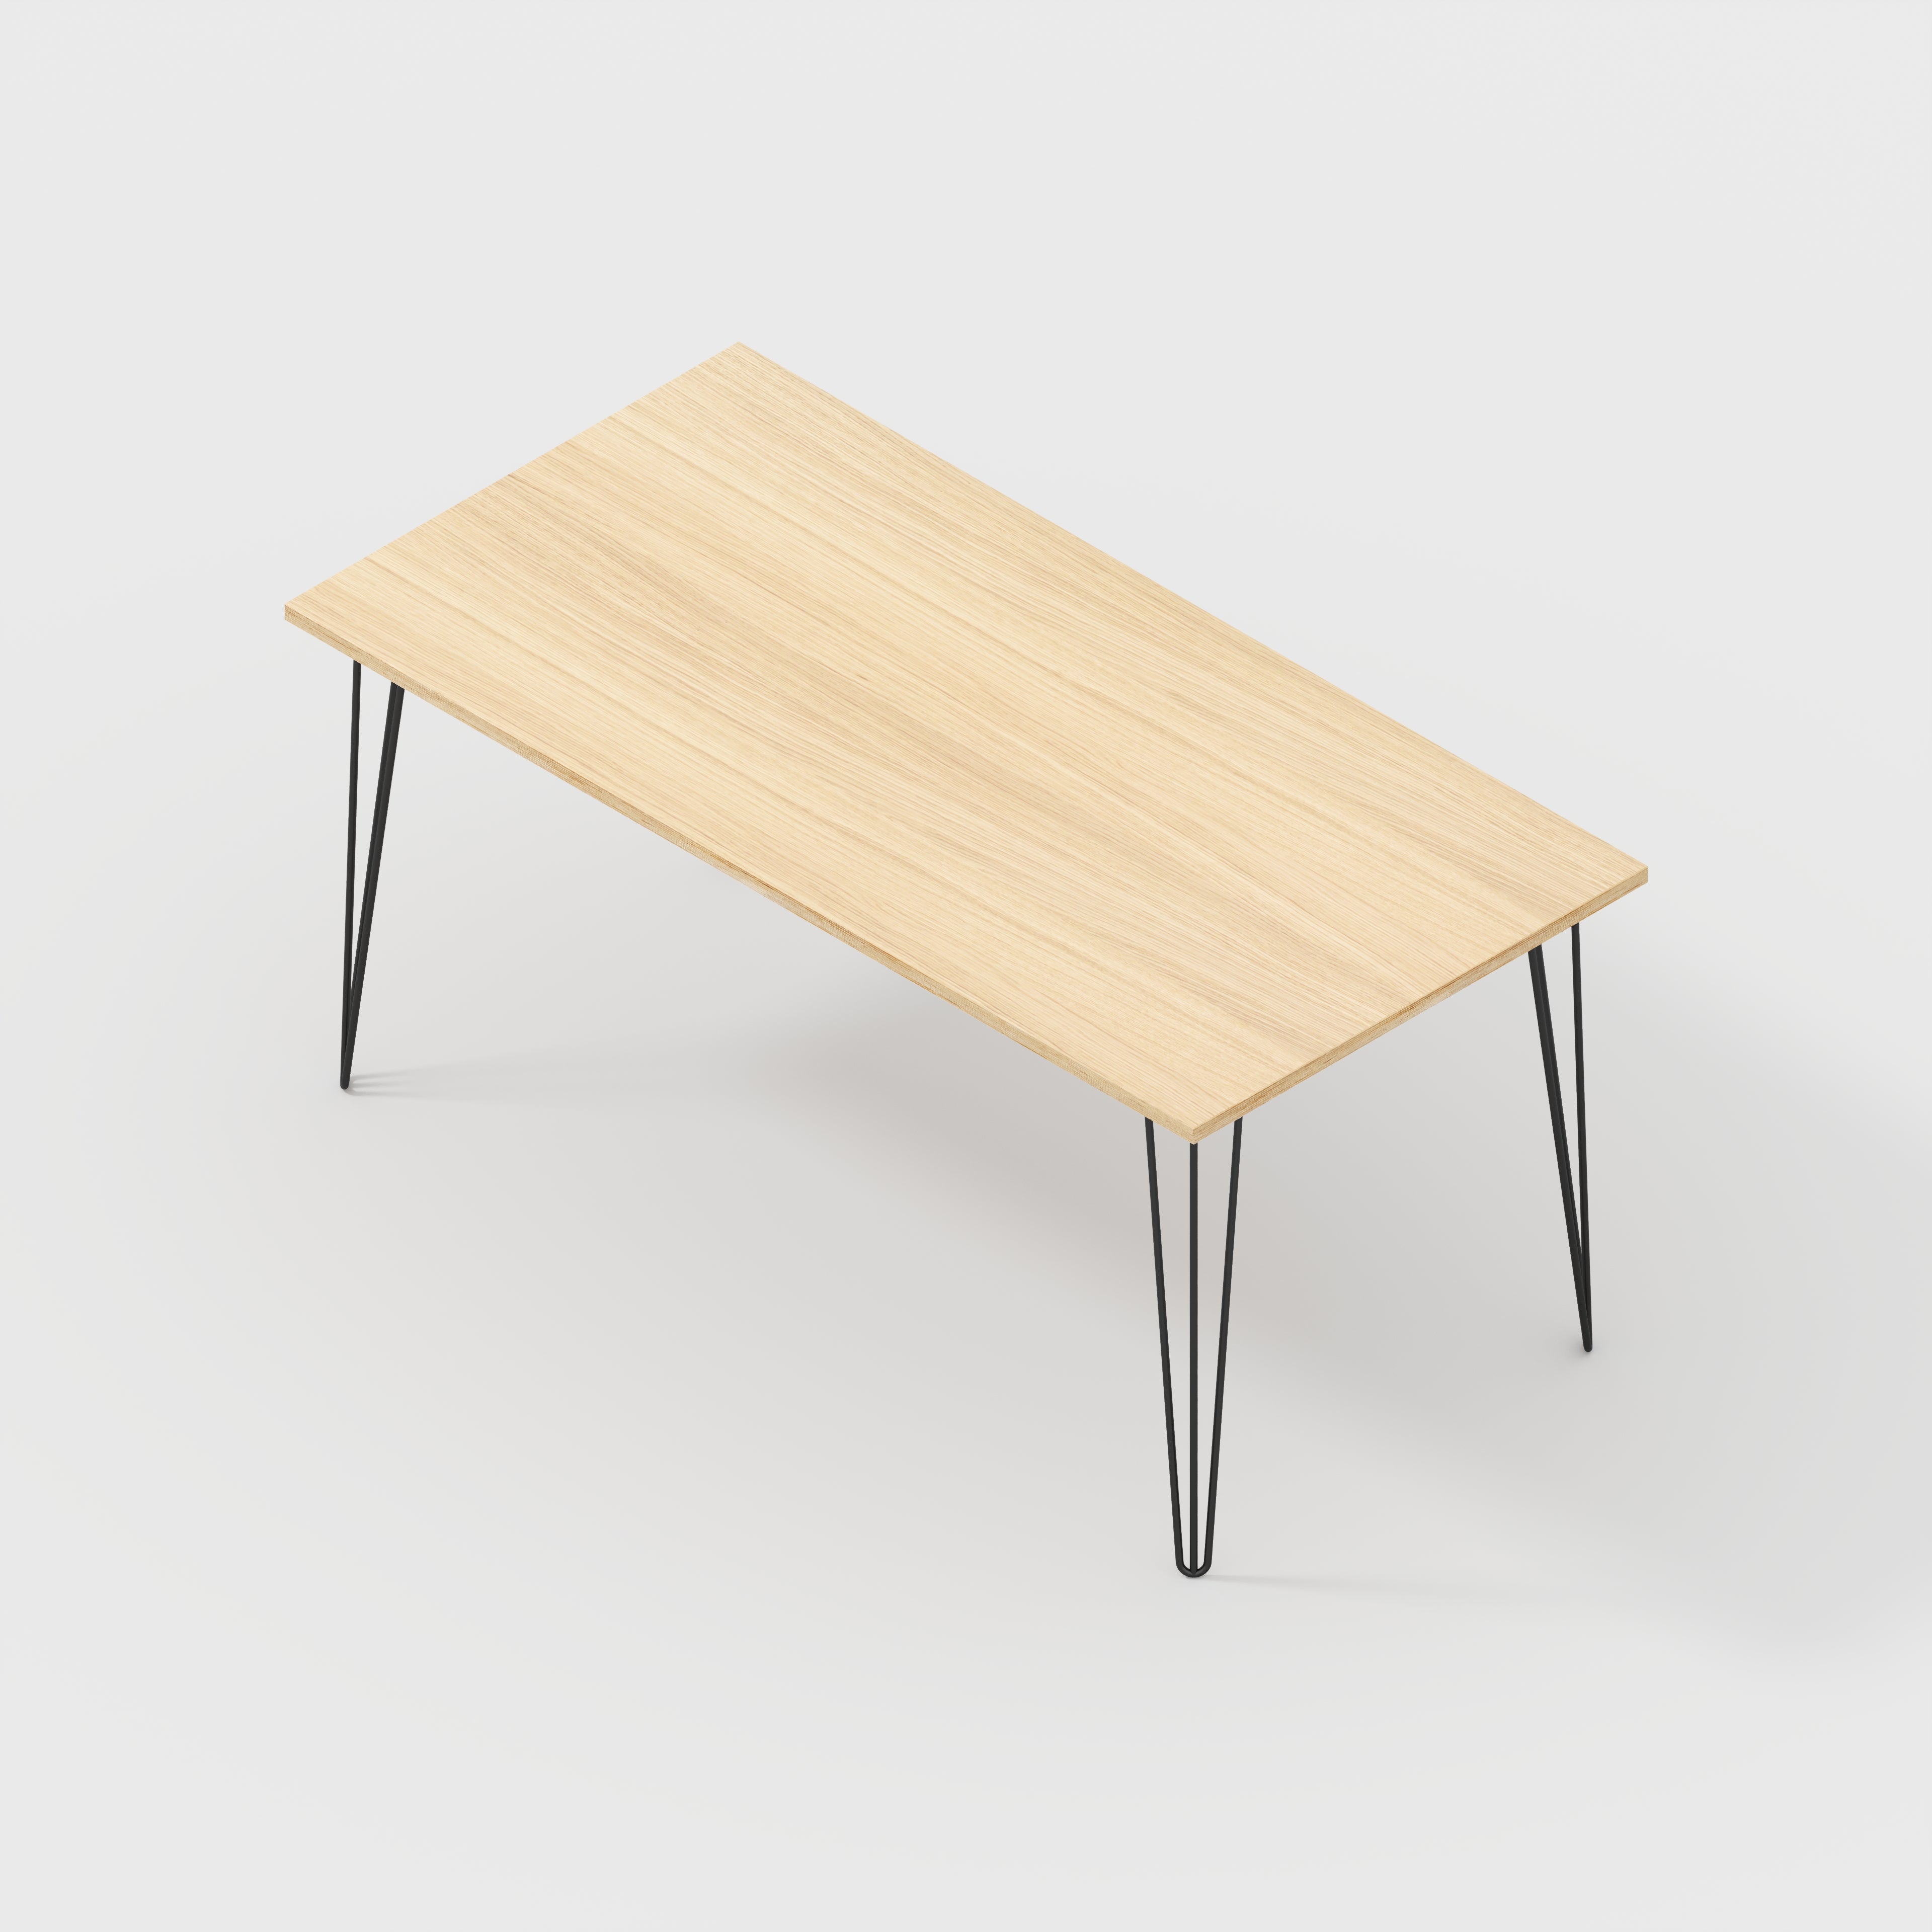 Table with Black Hairpin Legs - Plywood Oak - 1600(w) x 800(d)